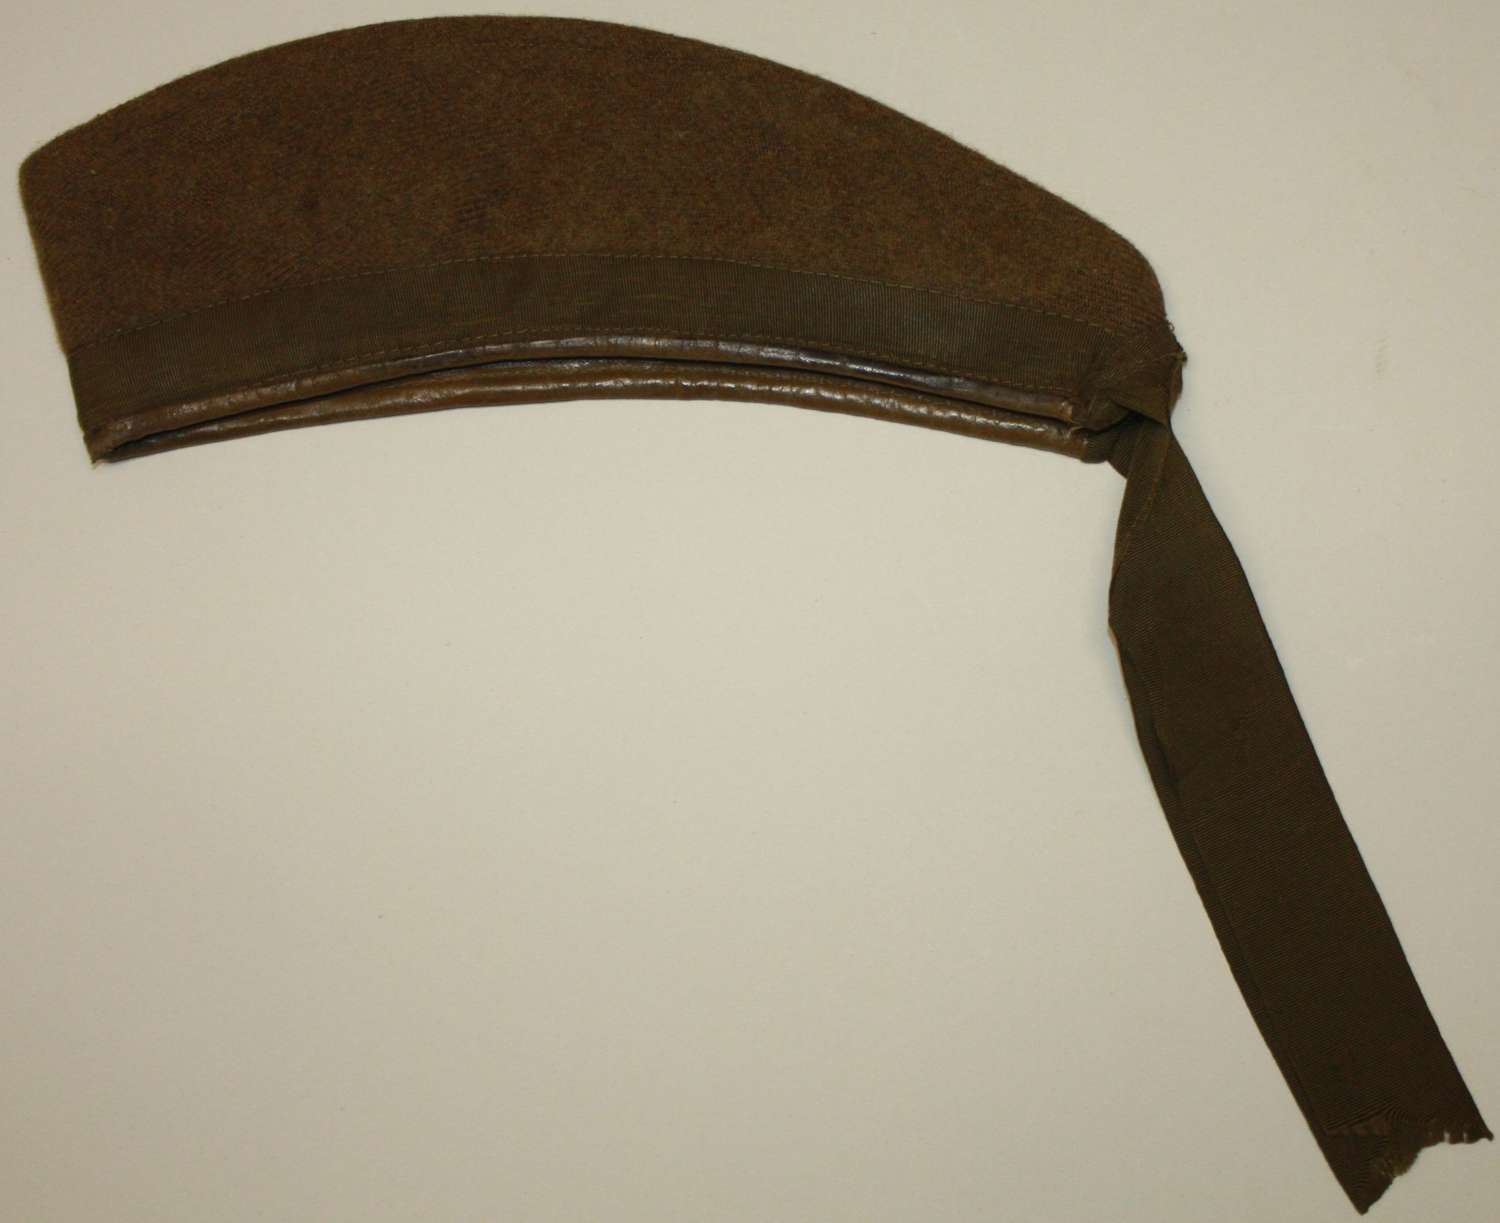 A 1916 DATED CANADIAN GLENGARRY CAP